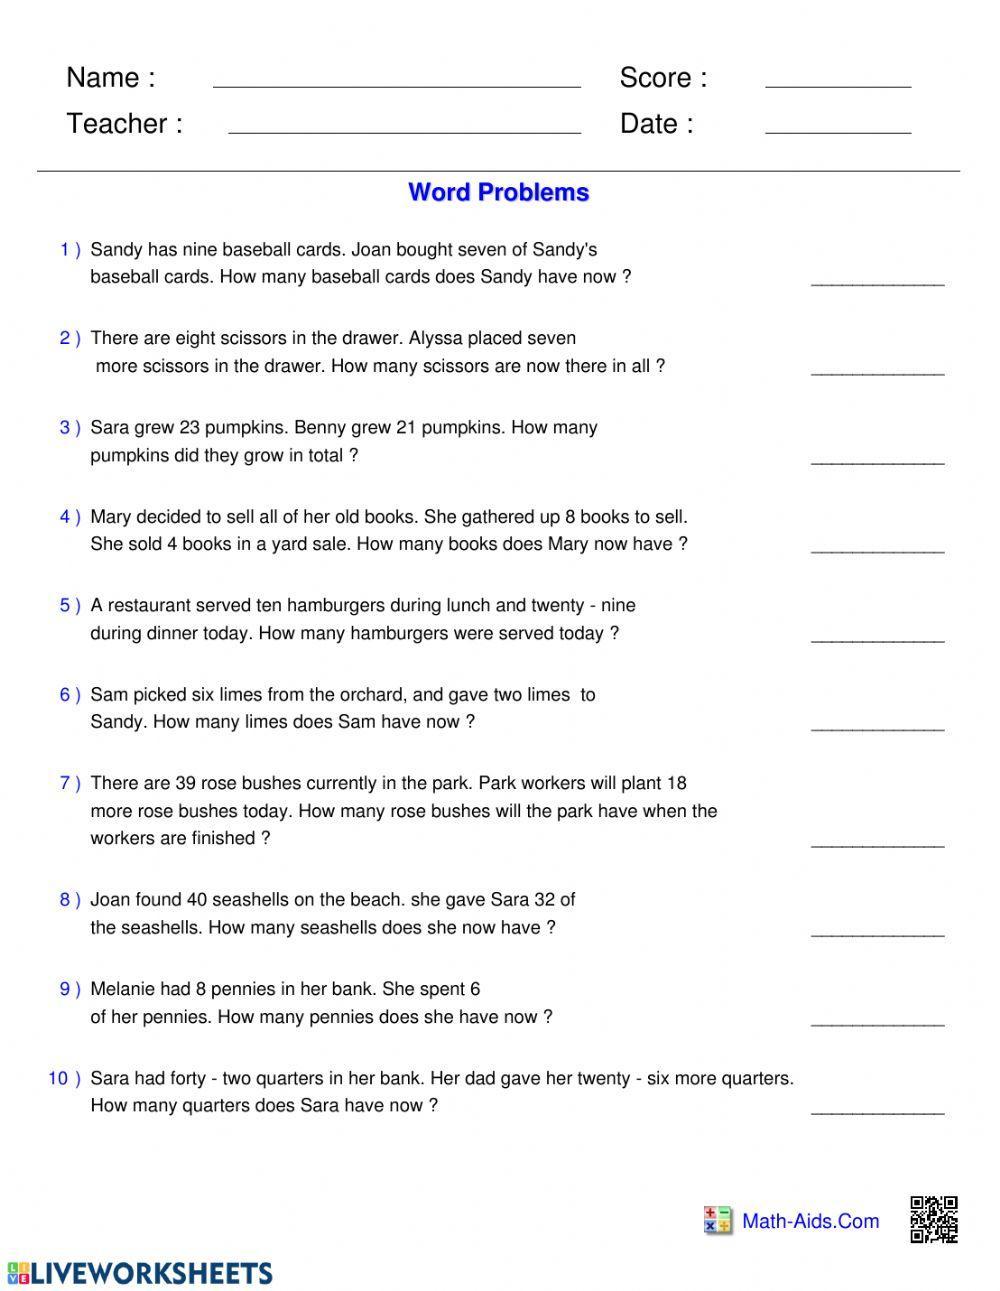 Word Problems - mixed operations